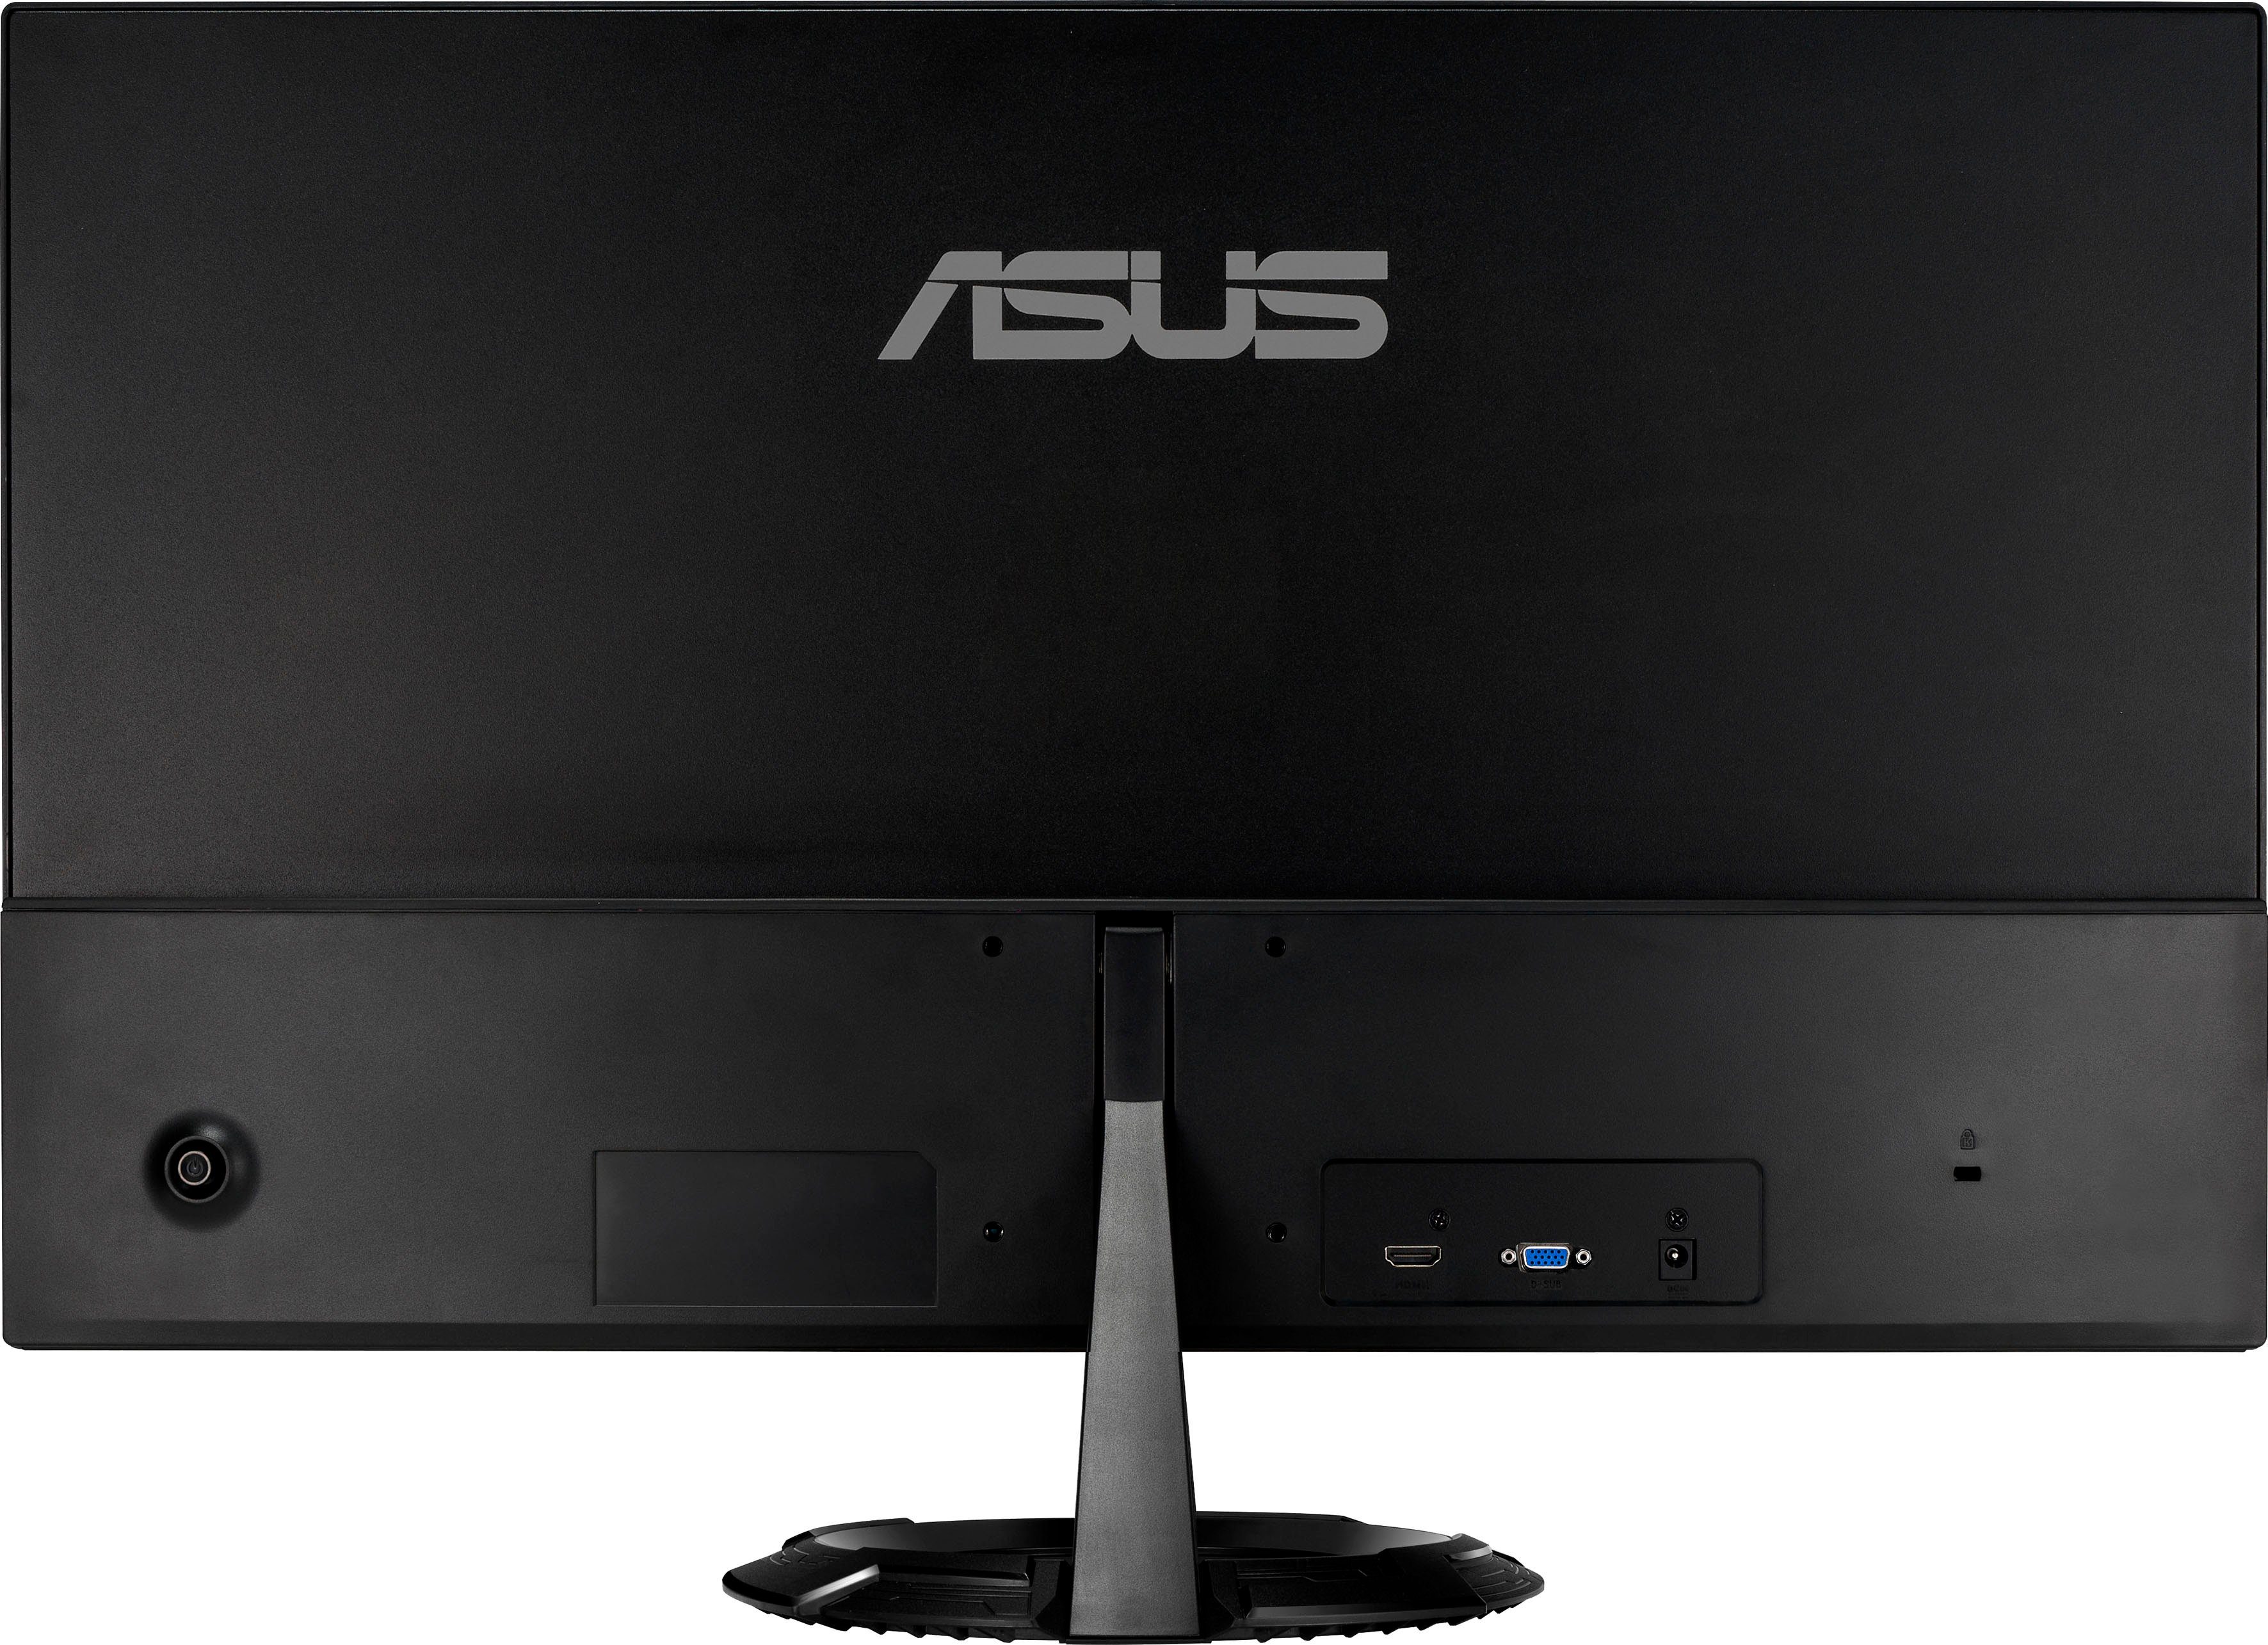 Asus VZ279HEG1R Hz, 75 LED-Monitor px, 1080 x Reaktionszeit, Full ms cm/27 IPS) HD, ", 1 (68,6 1920